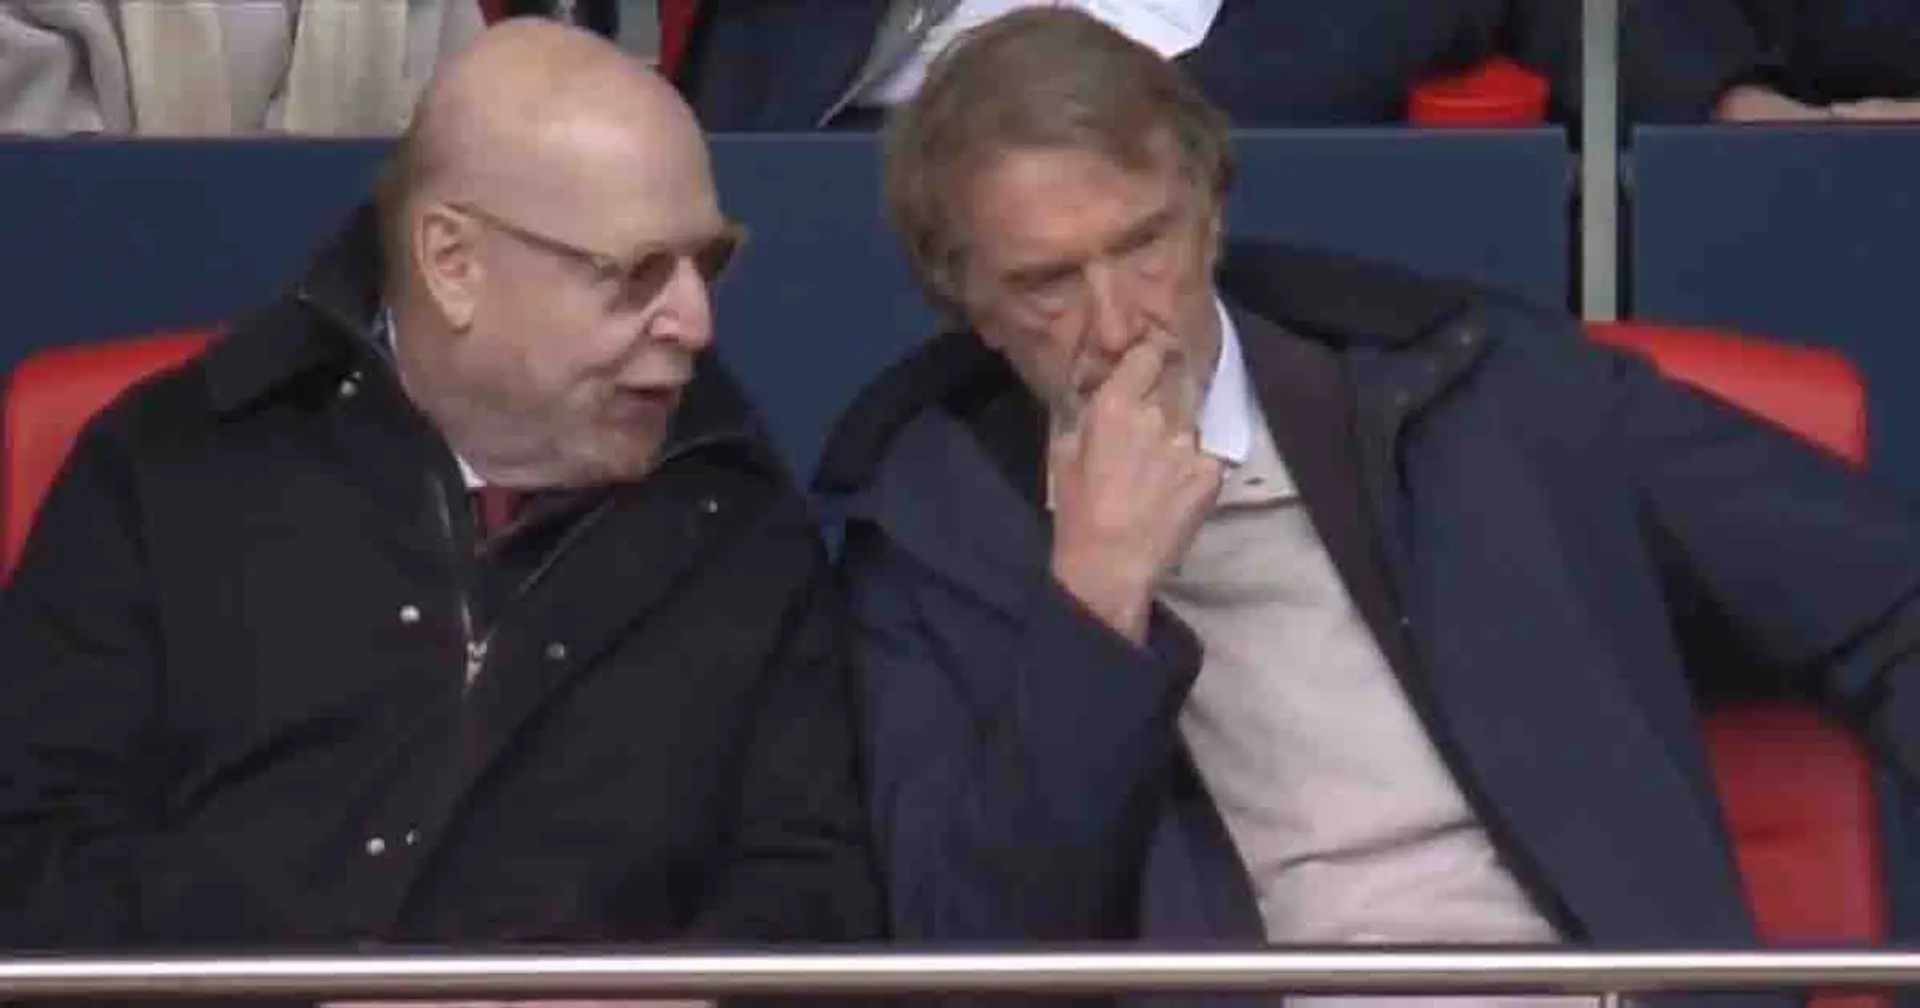 'One lovely man and a virus': Man United fans react as Sir Jim Ratcliffe spotted together with Avram Glazer